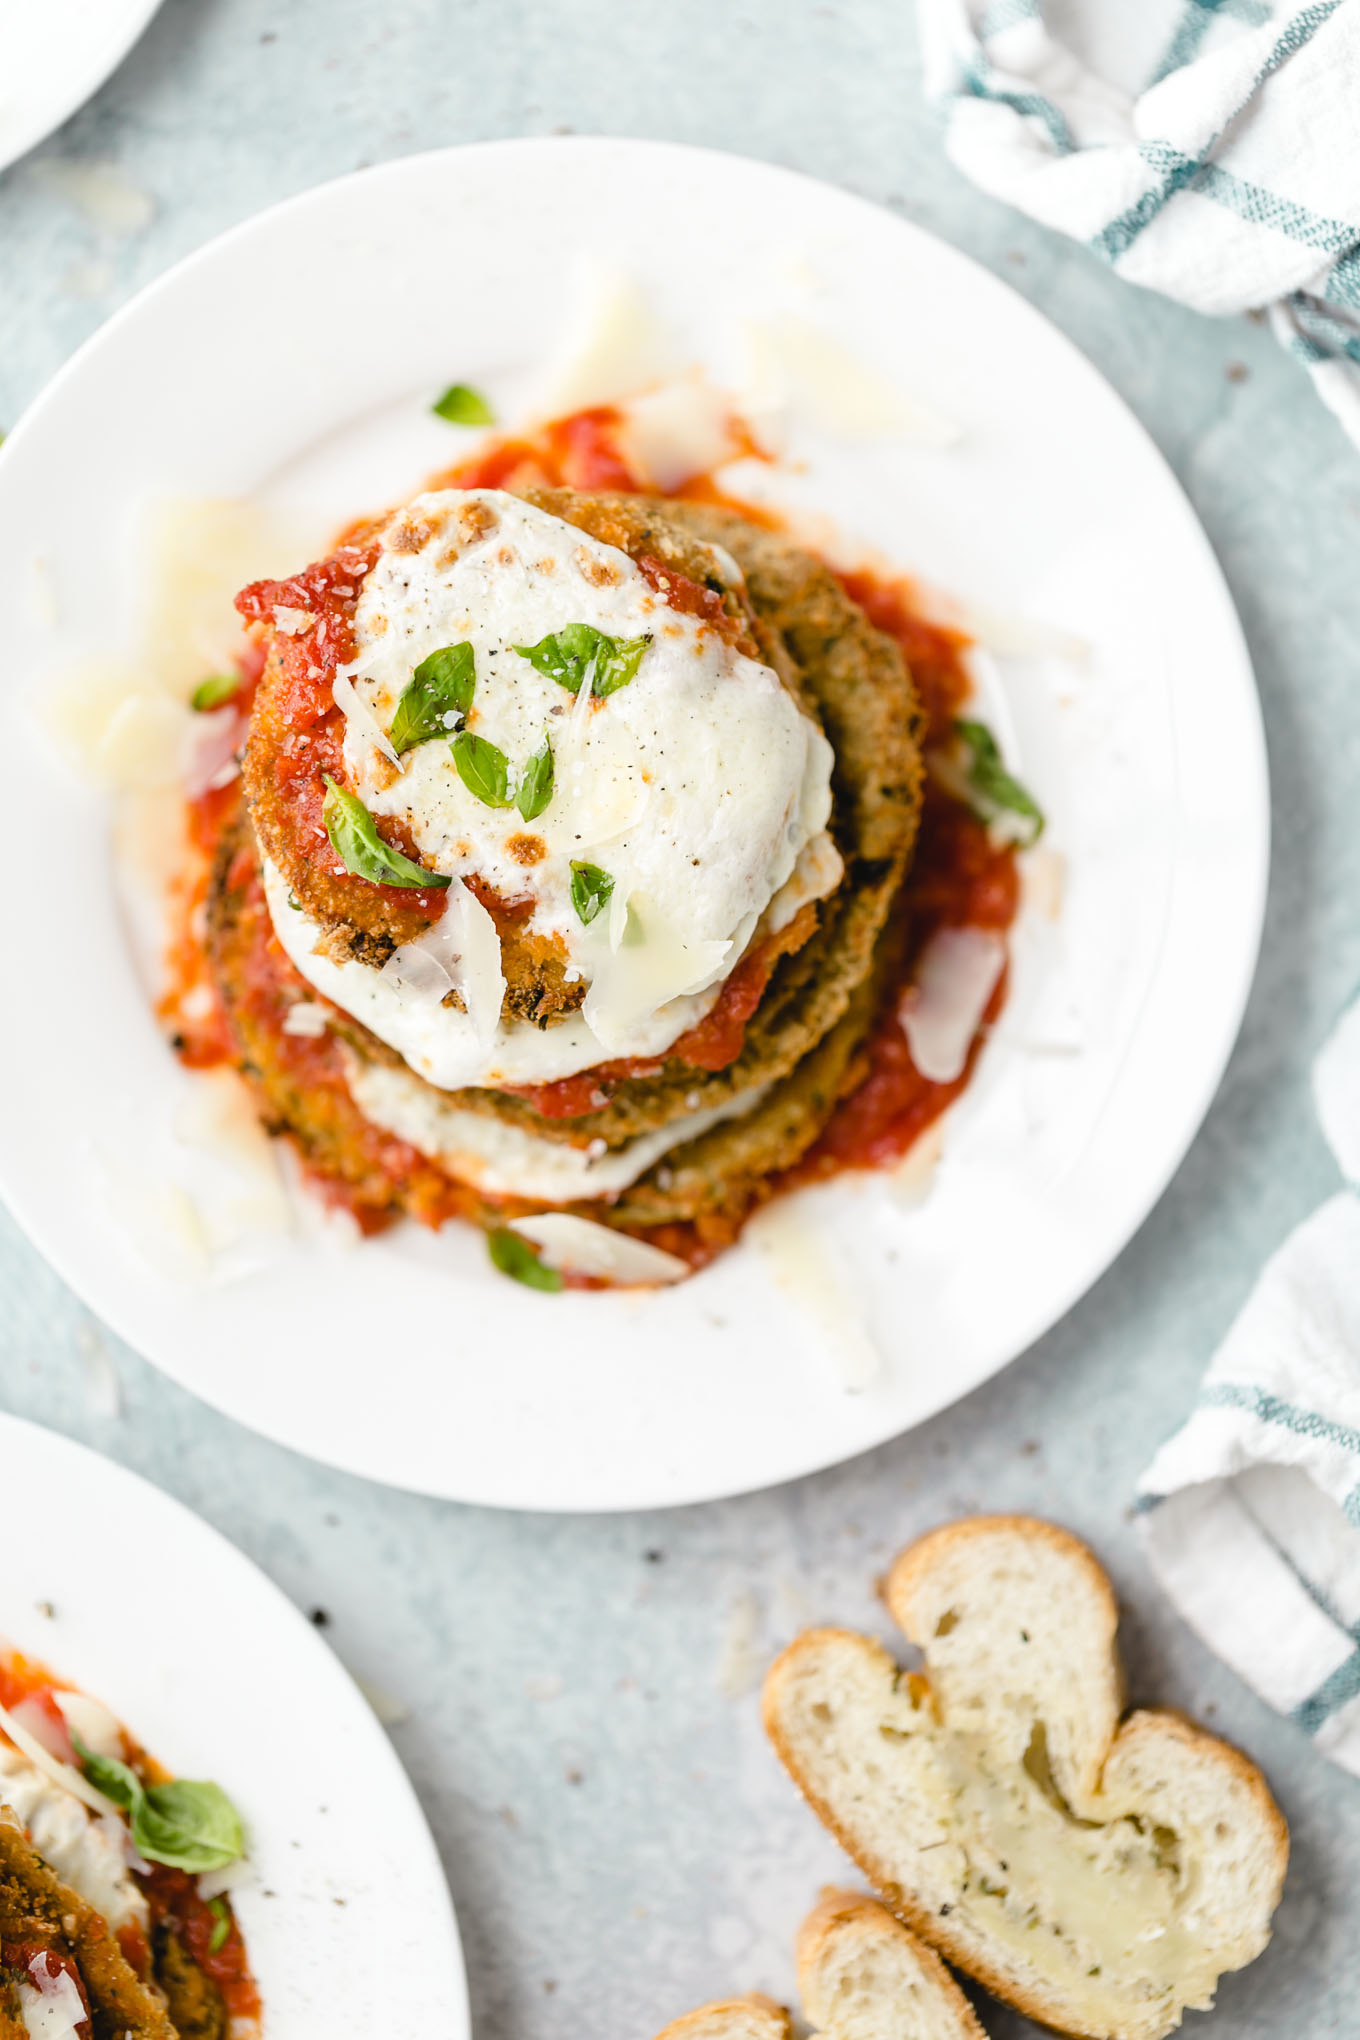 THE BEST Healthy Baked Eggplant Parmesan